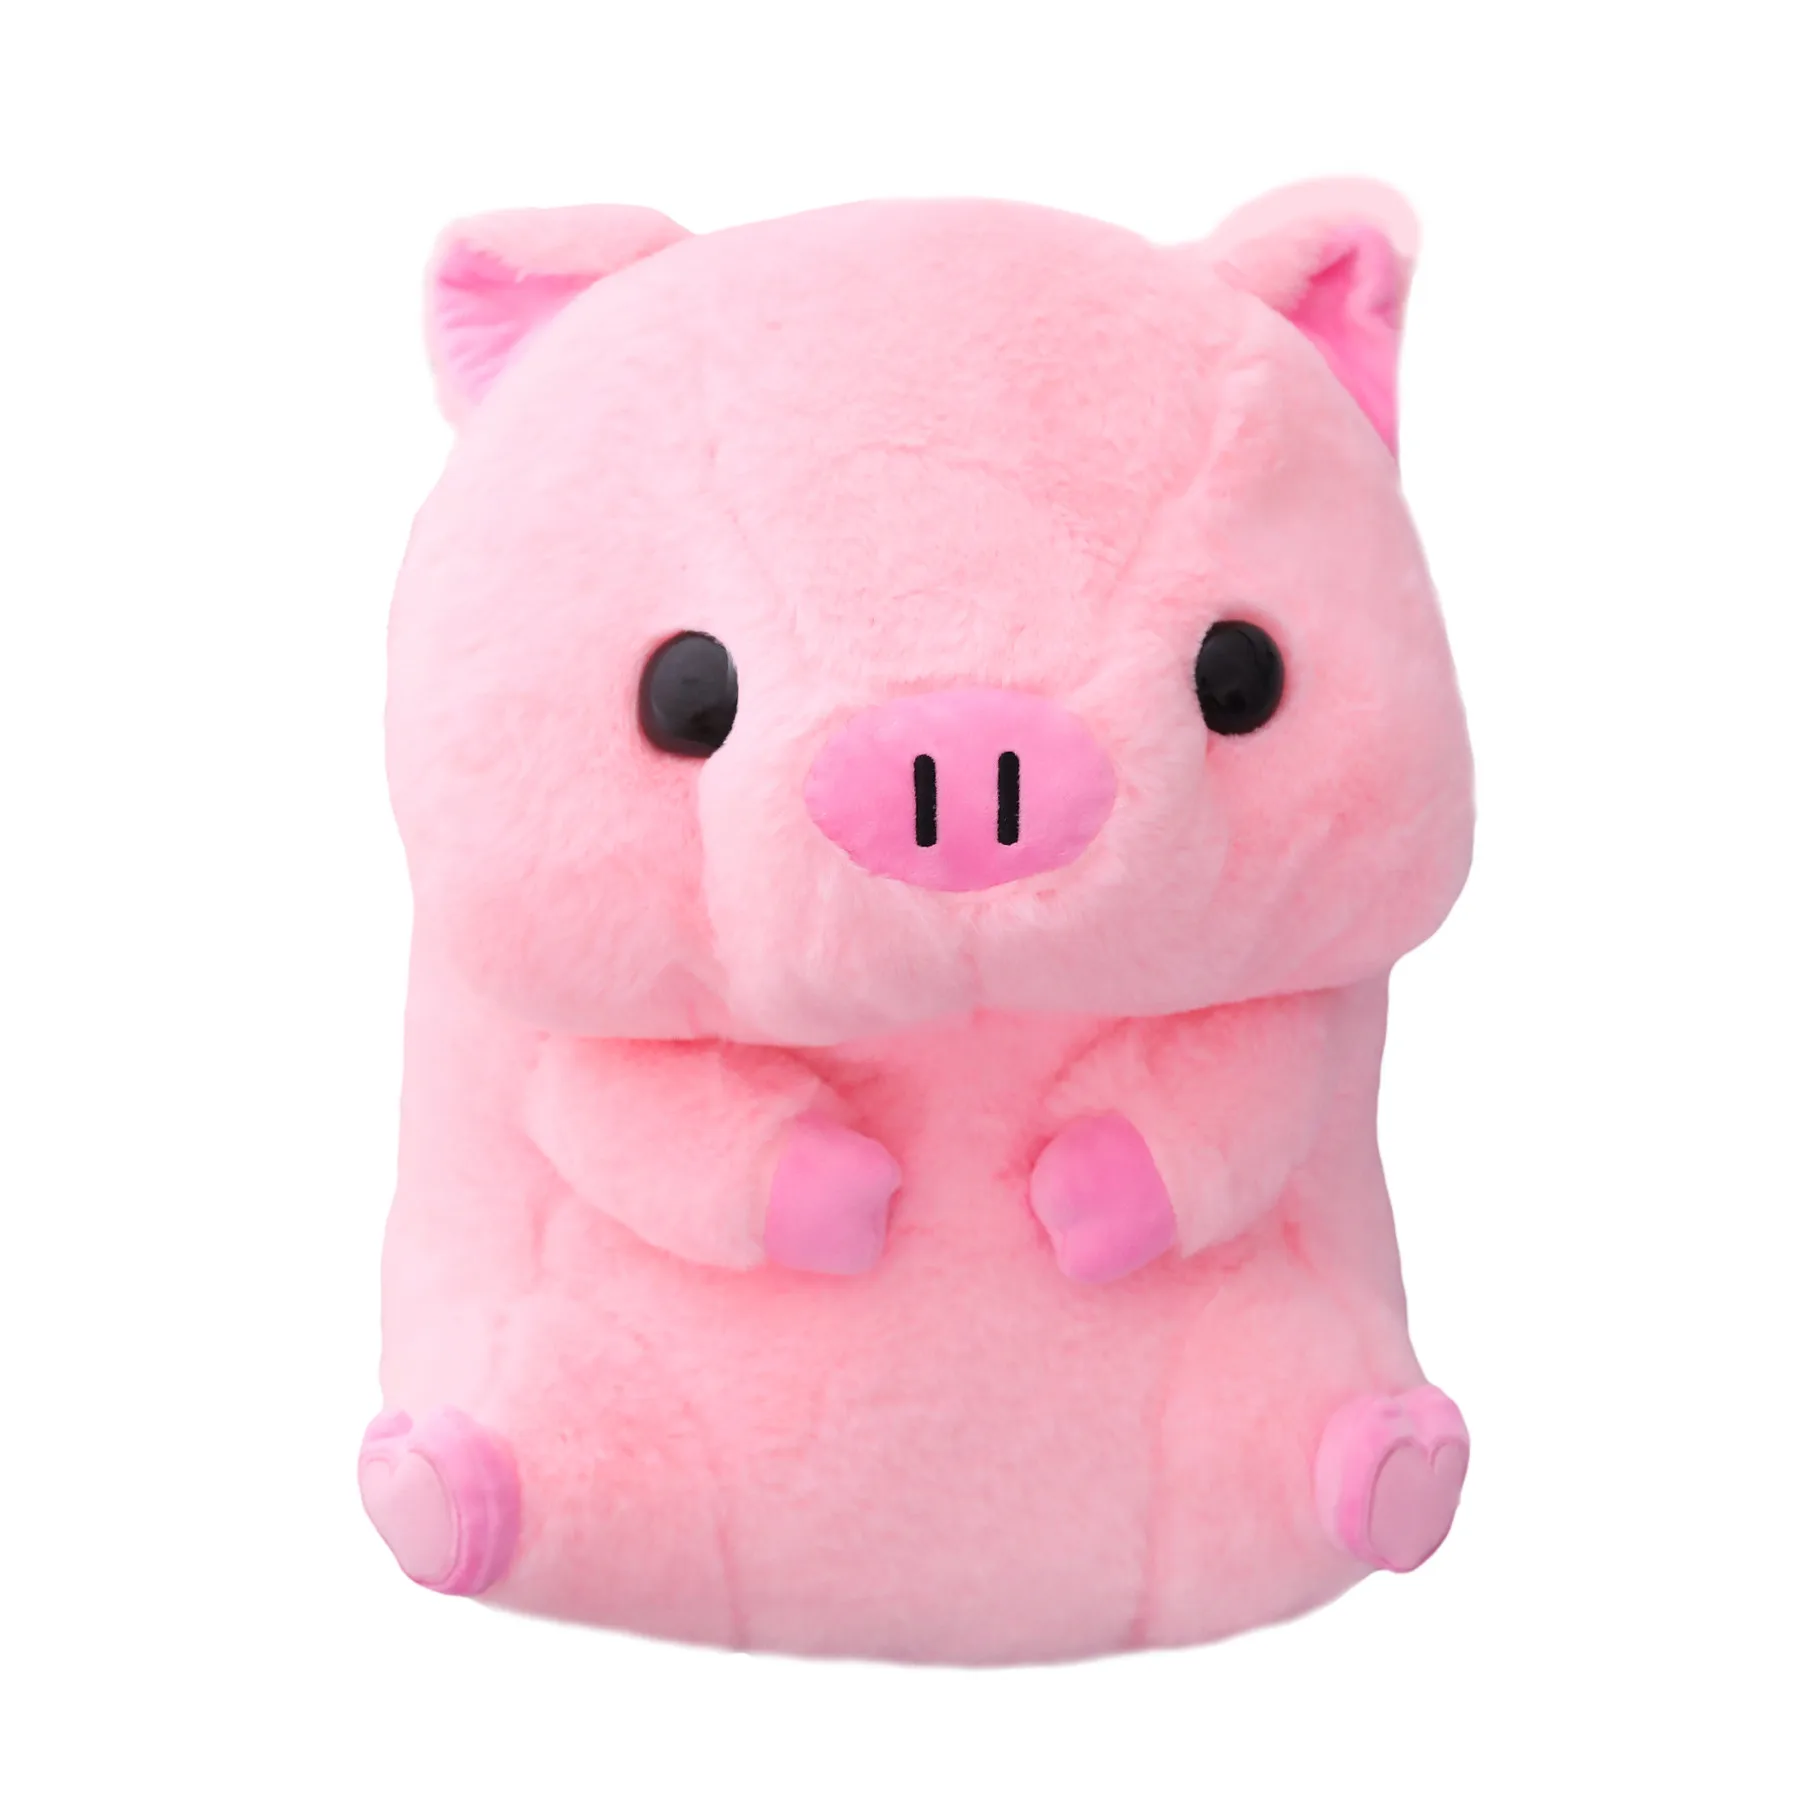 

Creative 40cm Cute Pig Plush Toy Stuffed Soft Lovely Animal Lucky Piggy Doll Baby Appease Pillow for Children Kids Birthday Gift